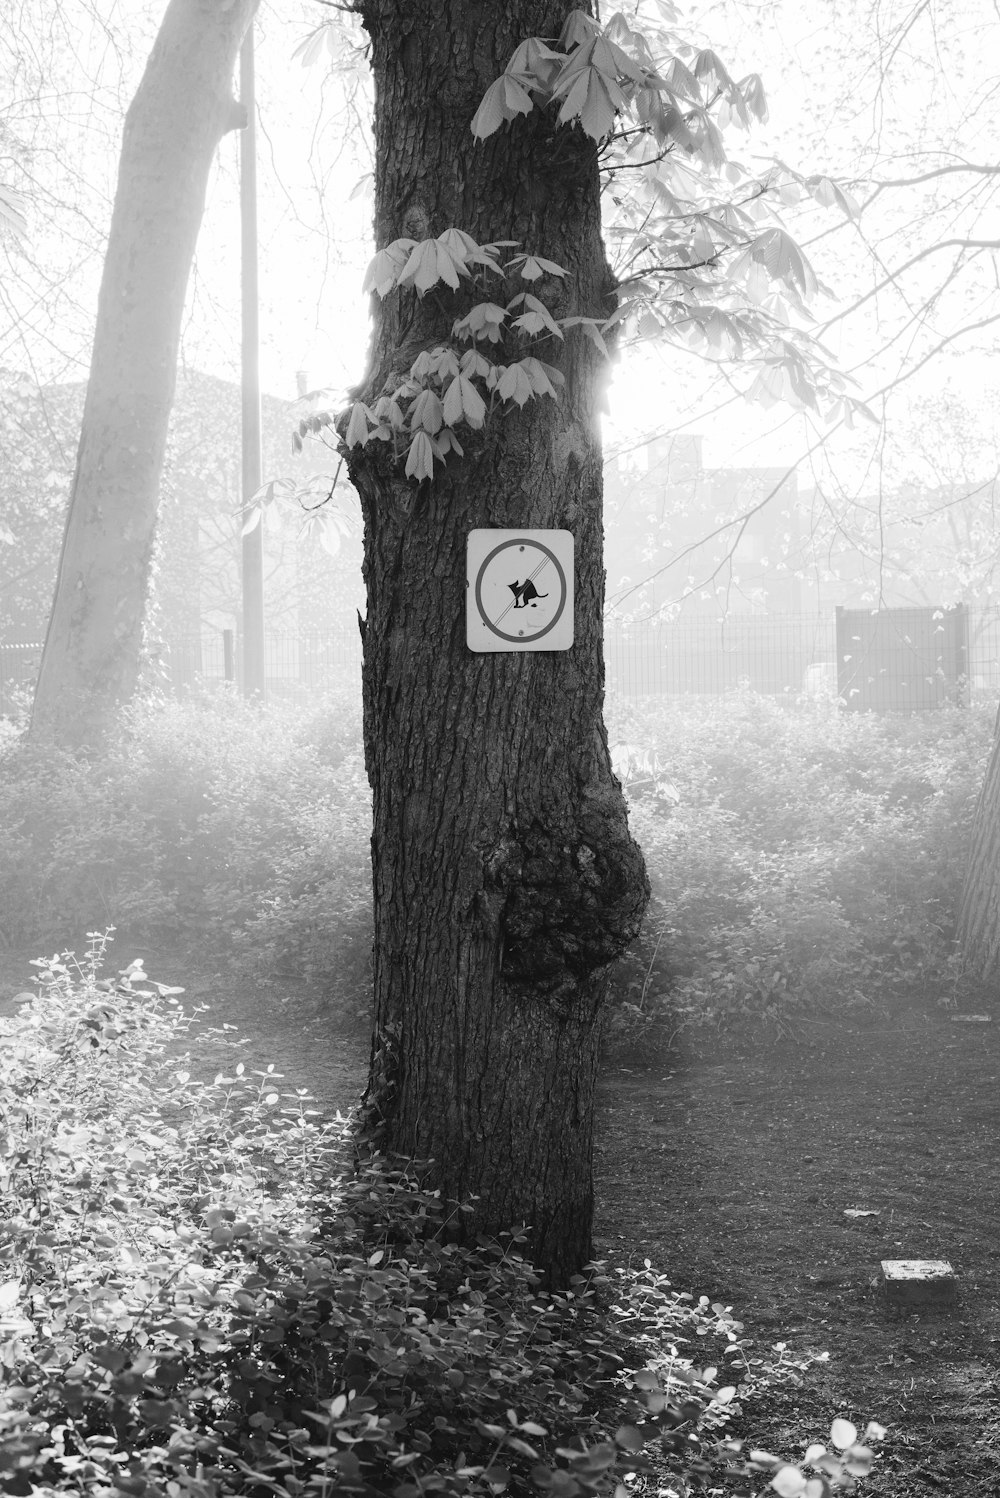 a black and white photo of a tree with a sign on it